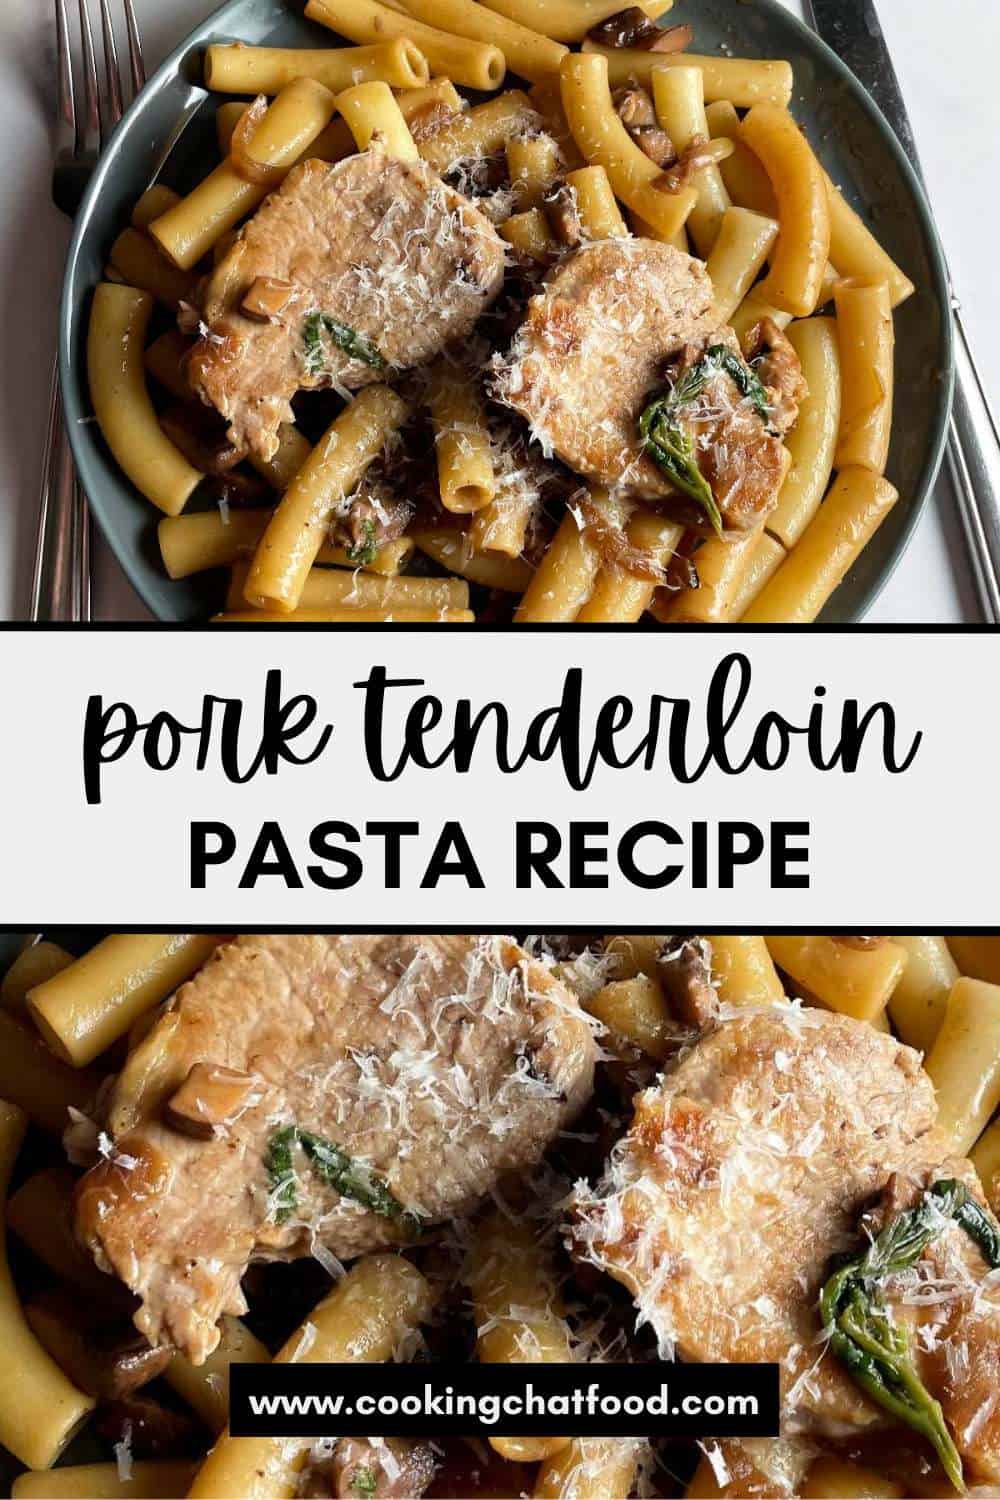 Collage with two images of pork tenderloin pasta along with text with the recipe title.